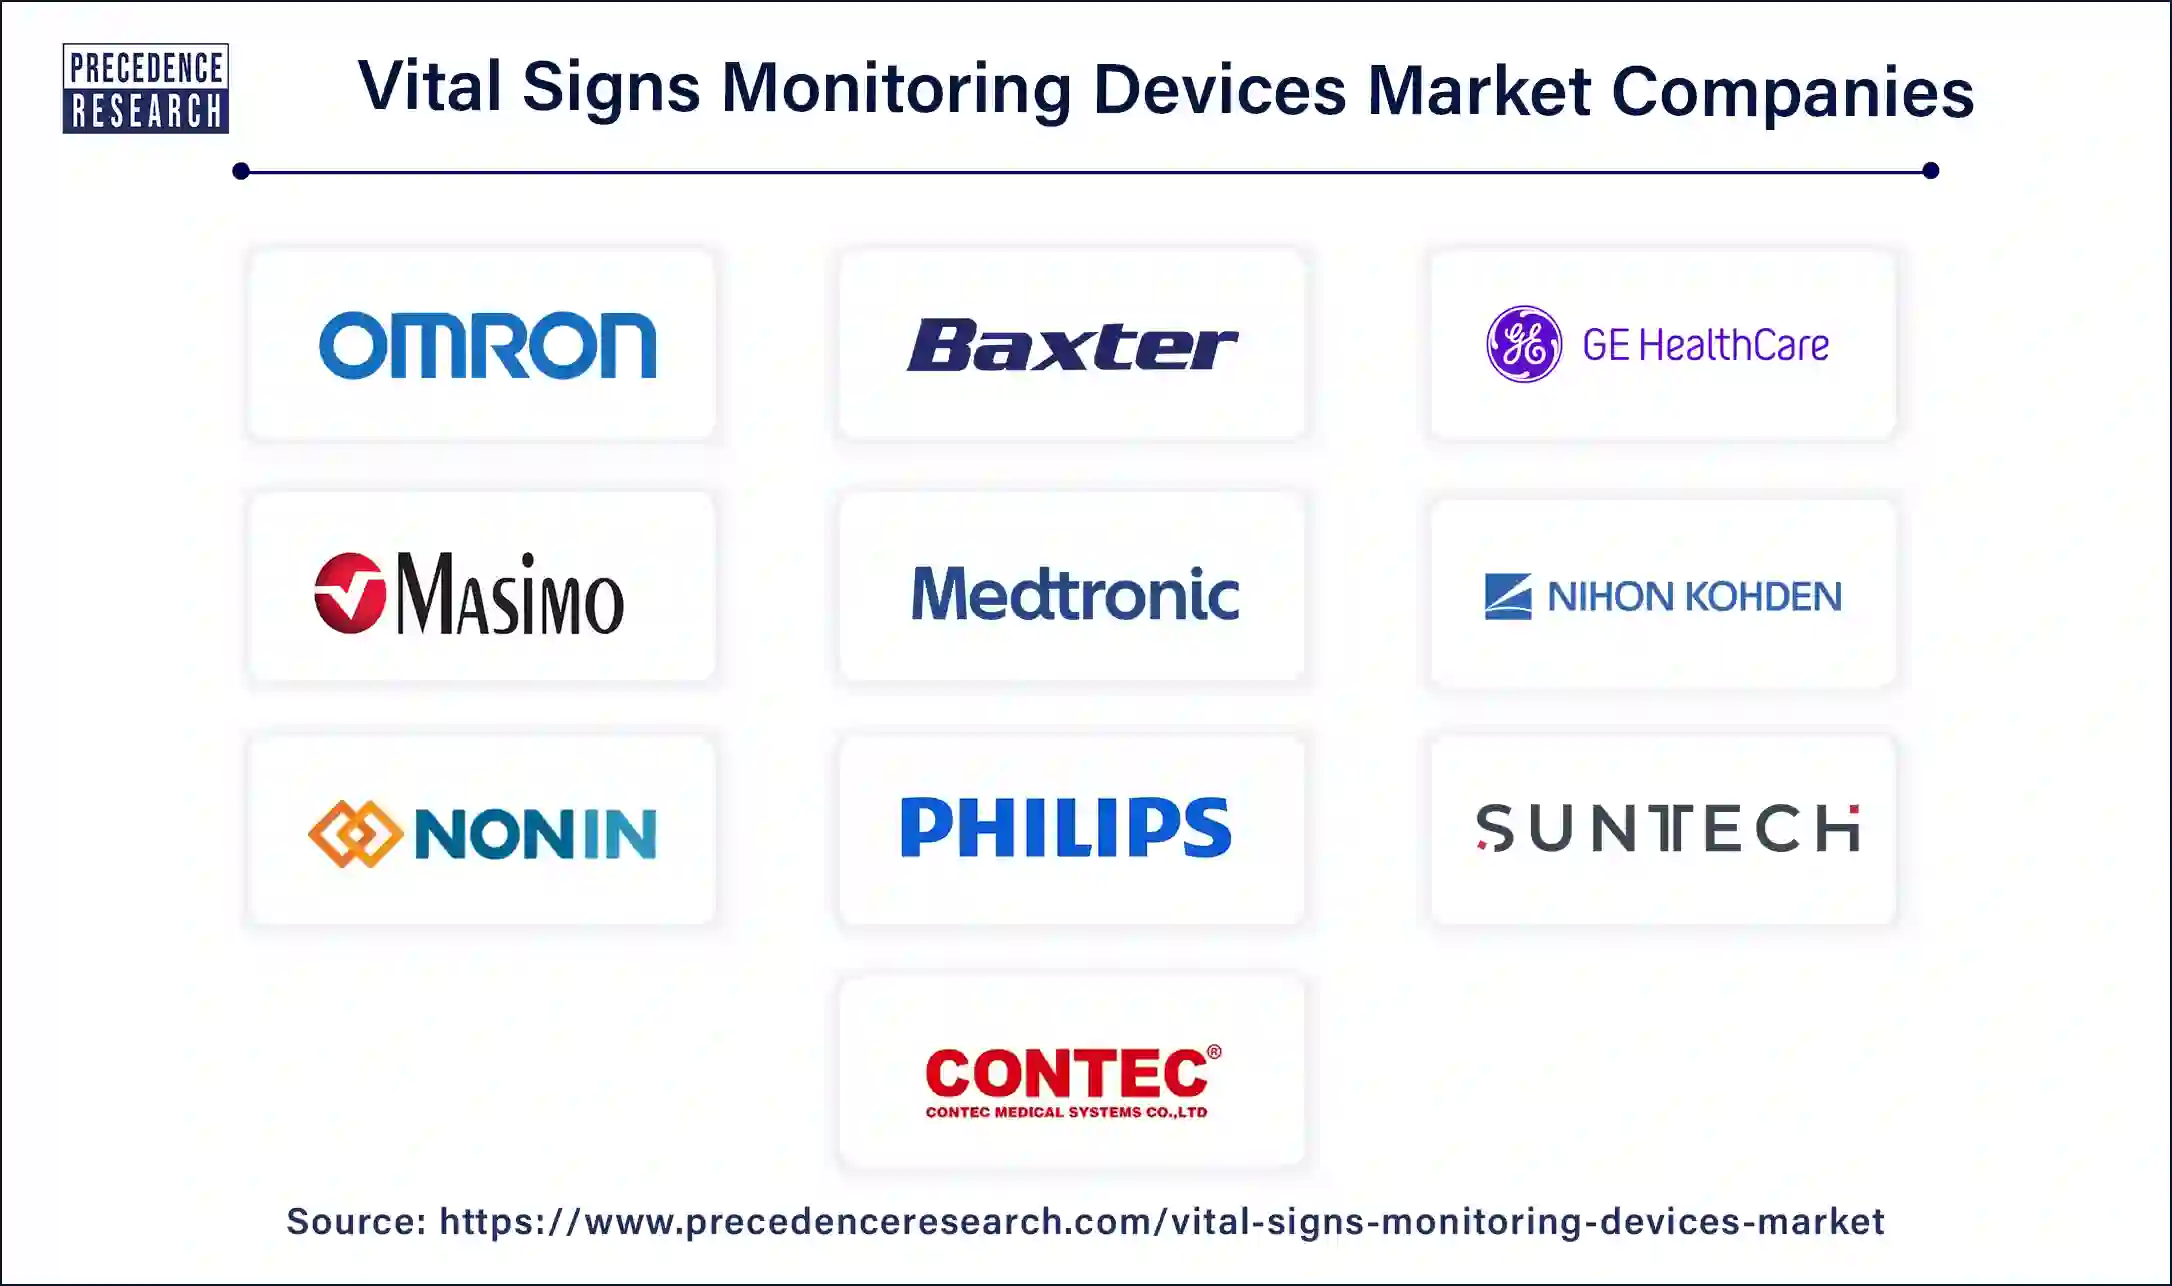 Vital Signs Monitoring Devices Companies